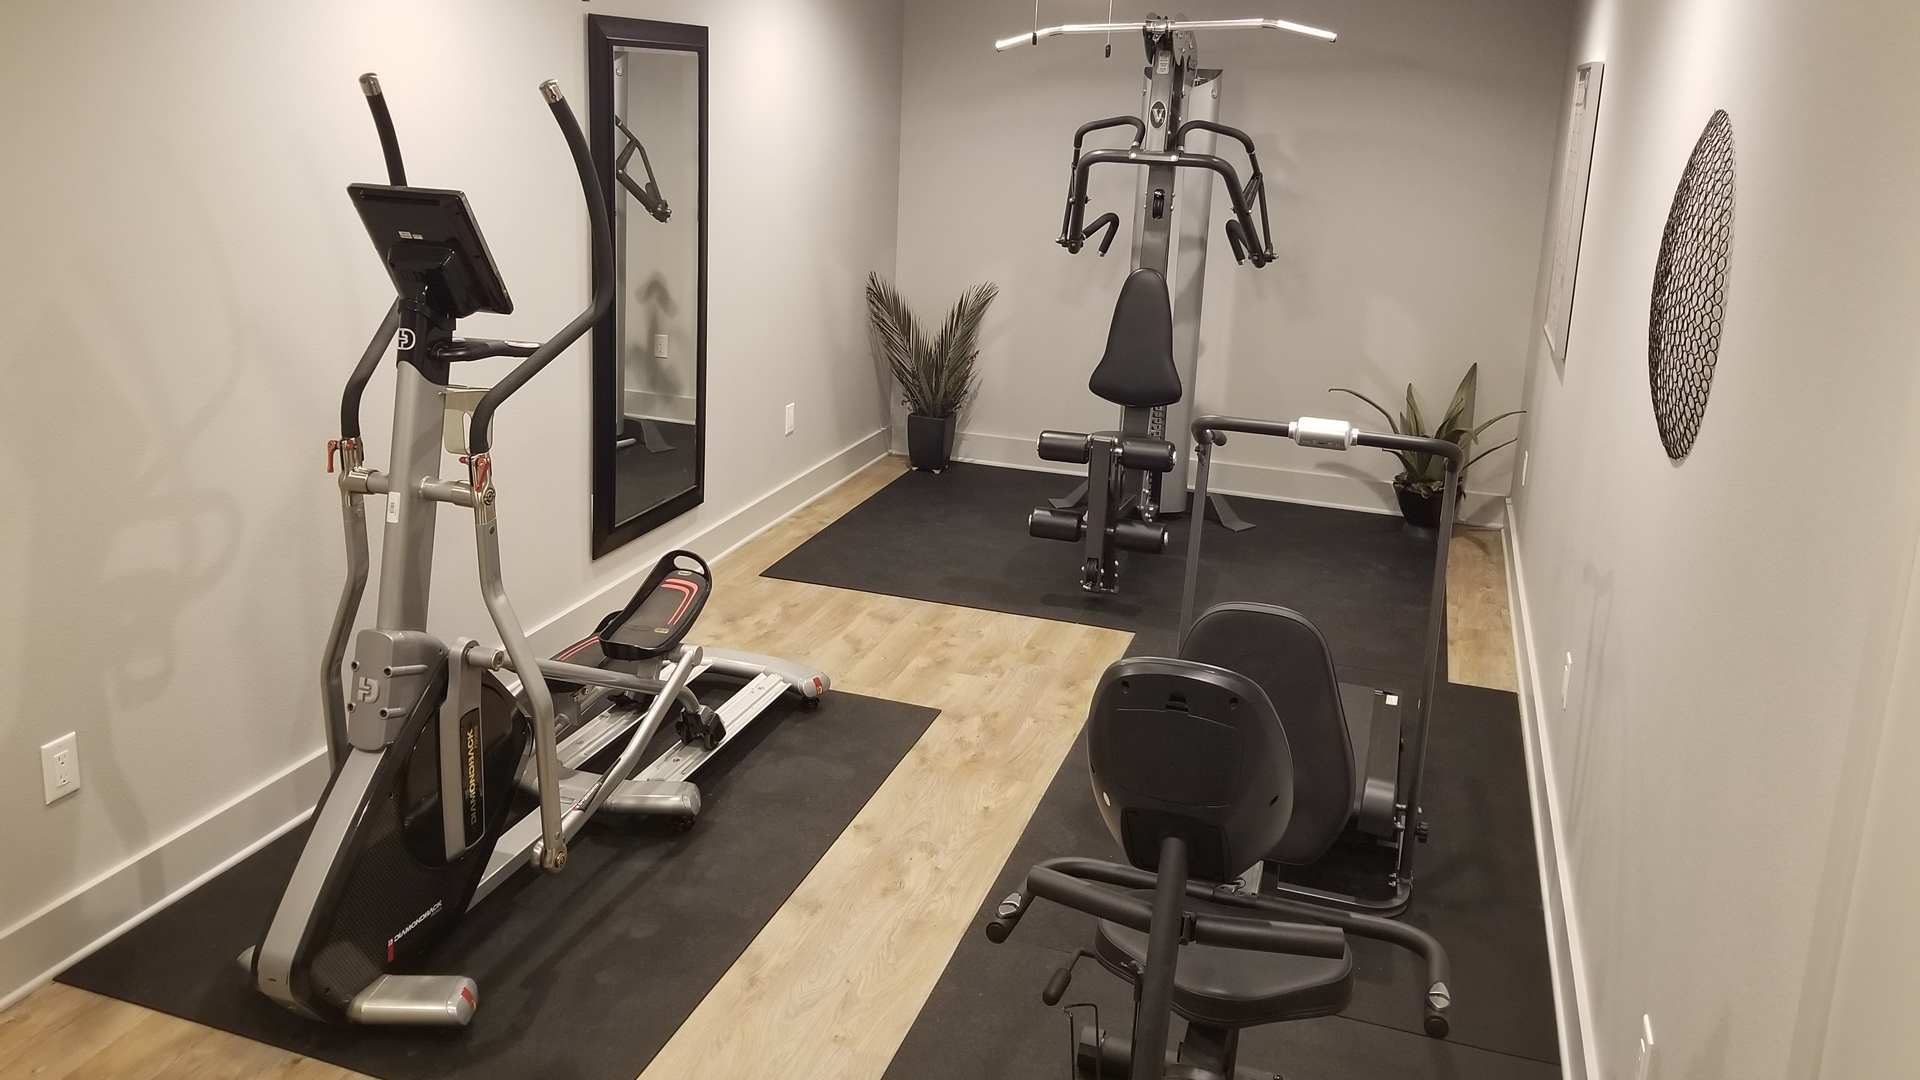 https://roadrunneracres.com/wp-content/uploads/2021/12/Our-fitness-center-features-a-professional-home-gym-elliptical-machine-recumbent-bike-treadmill-and-large-satellite-TV..jpg